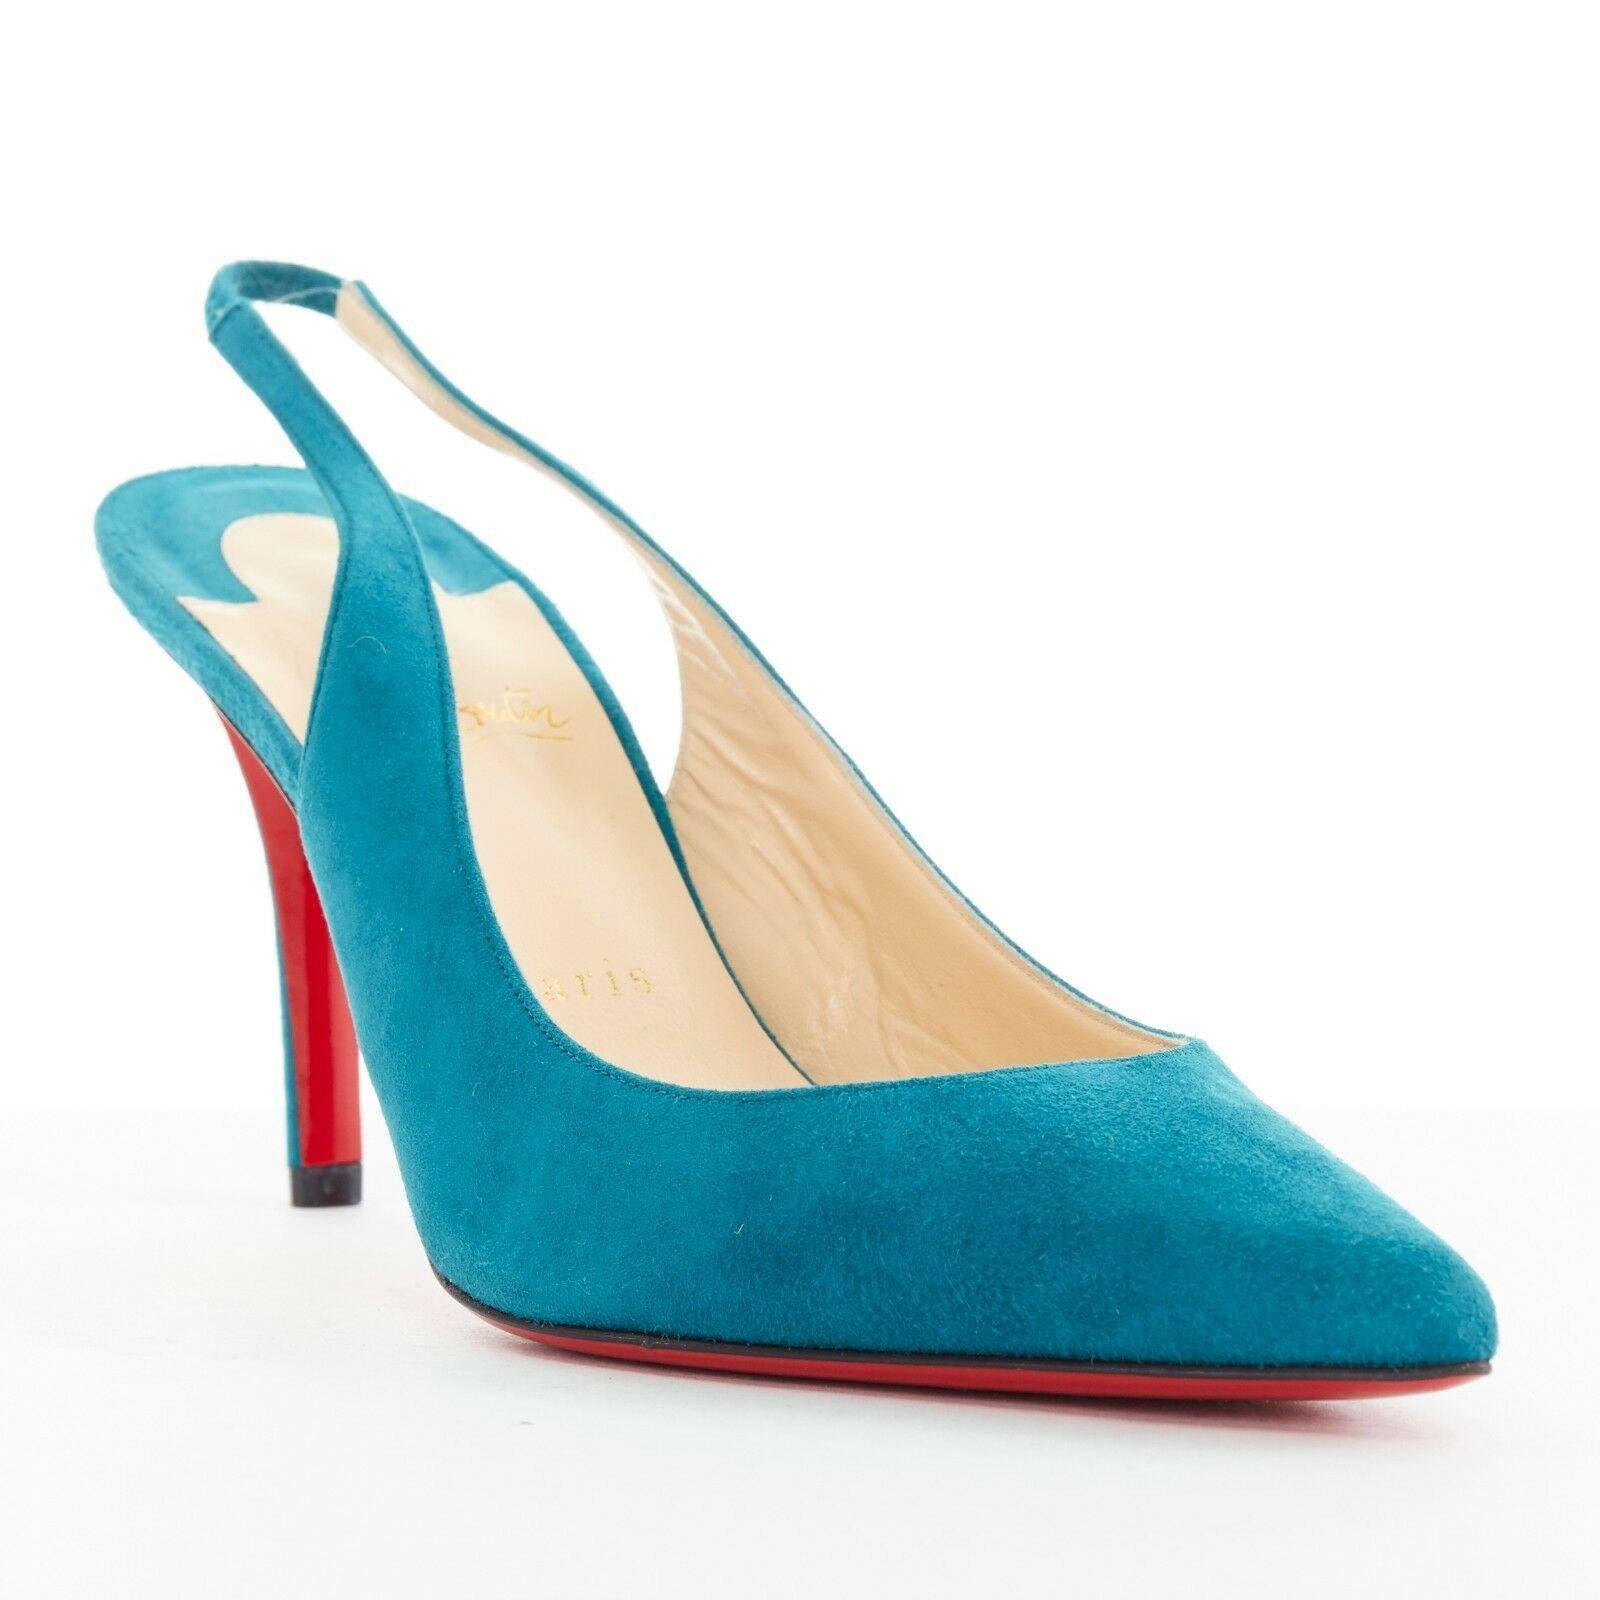 new CHRISTIAN LOUBOUTIN Apostrophy Sling blue suede pointy slingback heel EU39
CHRISTIAN LOUBOUTIN
Apostrophy Sling 85. 
Teal blue suede leather upper. 
Pointed toe. 
Elasticated sling back strao. 
Stiletto heel. 
Tonal stitching. 
Signature red